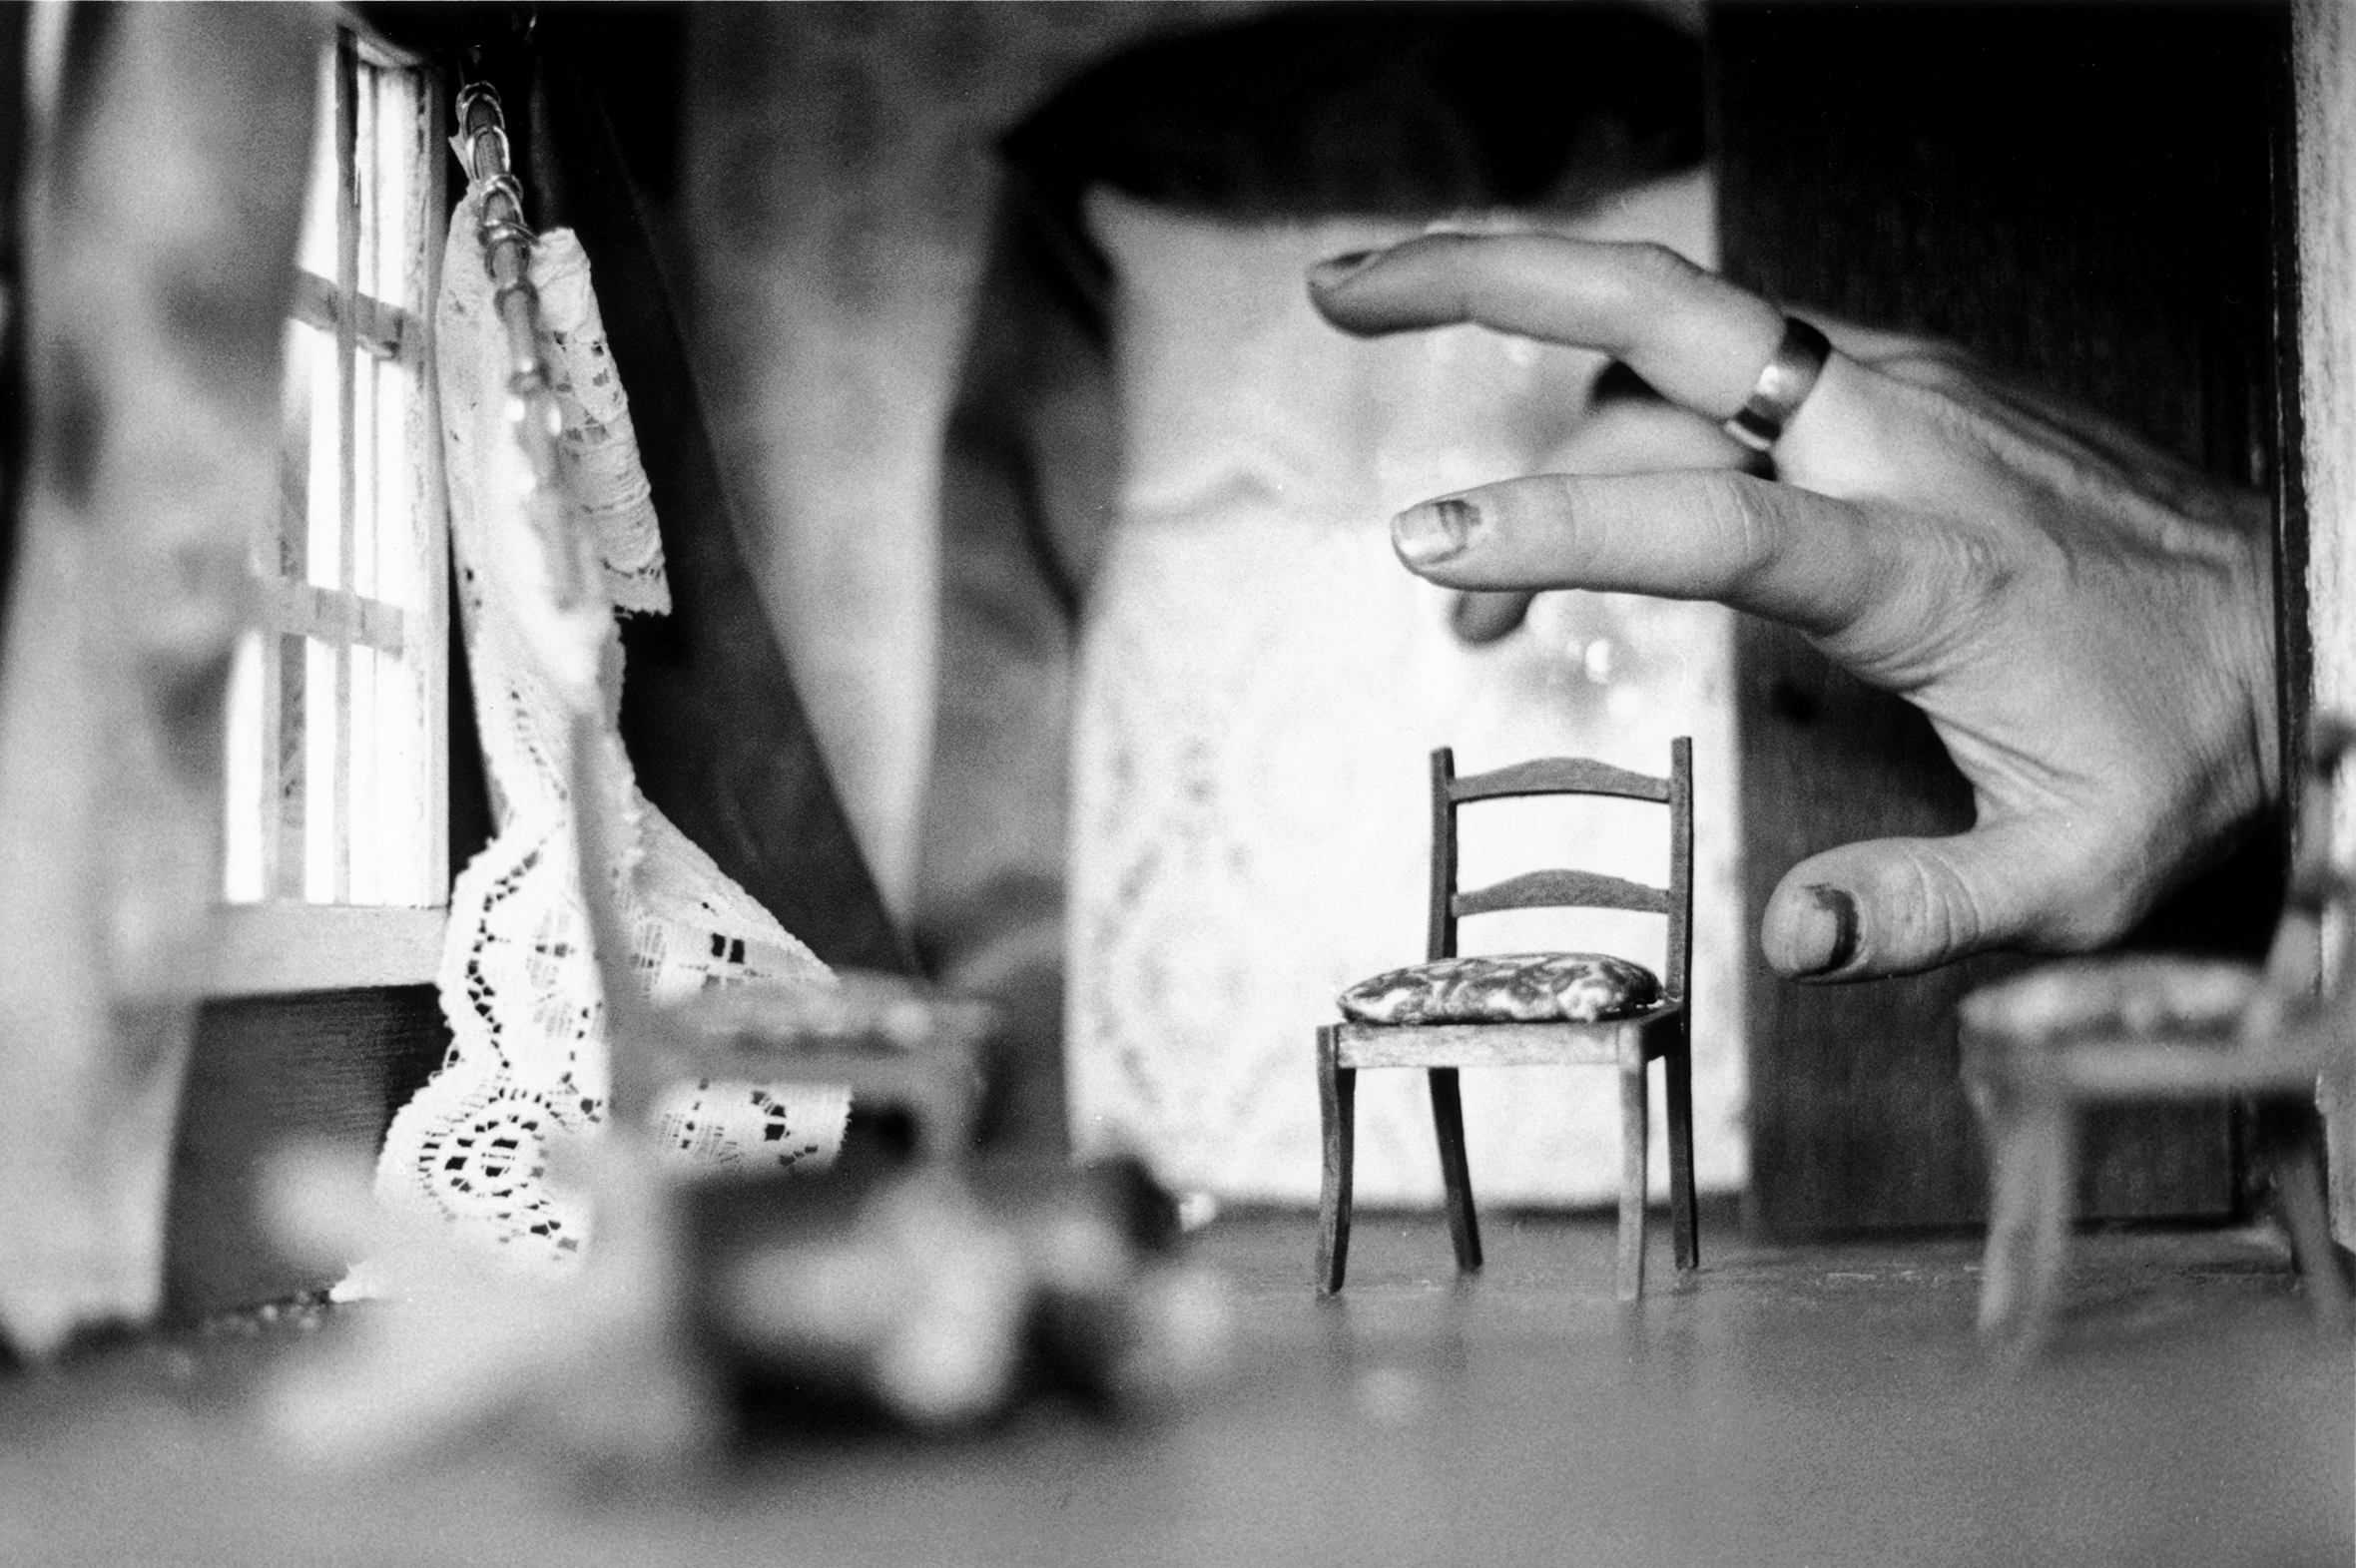 A woman's hand rearranges the furniture in an interior room in a dollhouse that has a window with curtains and three chairs.